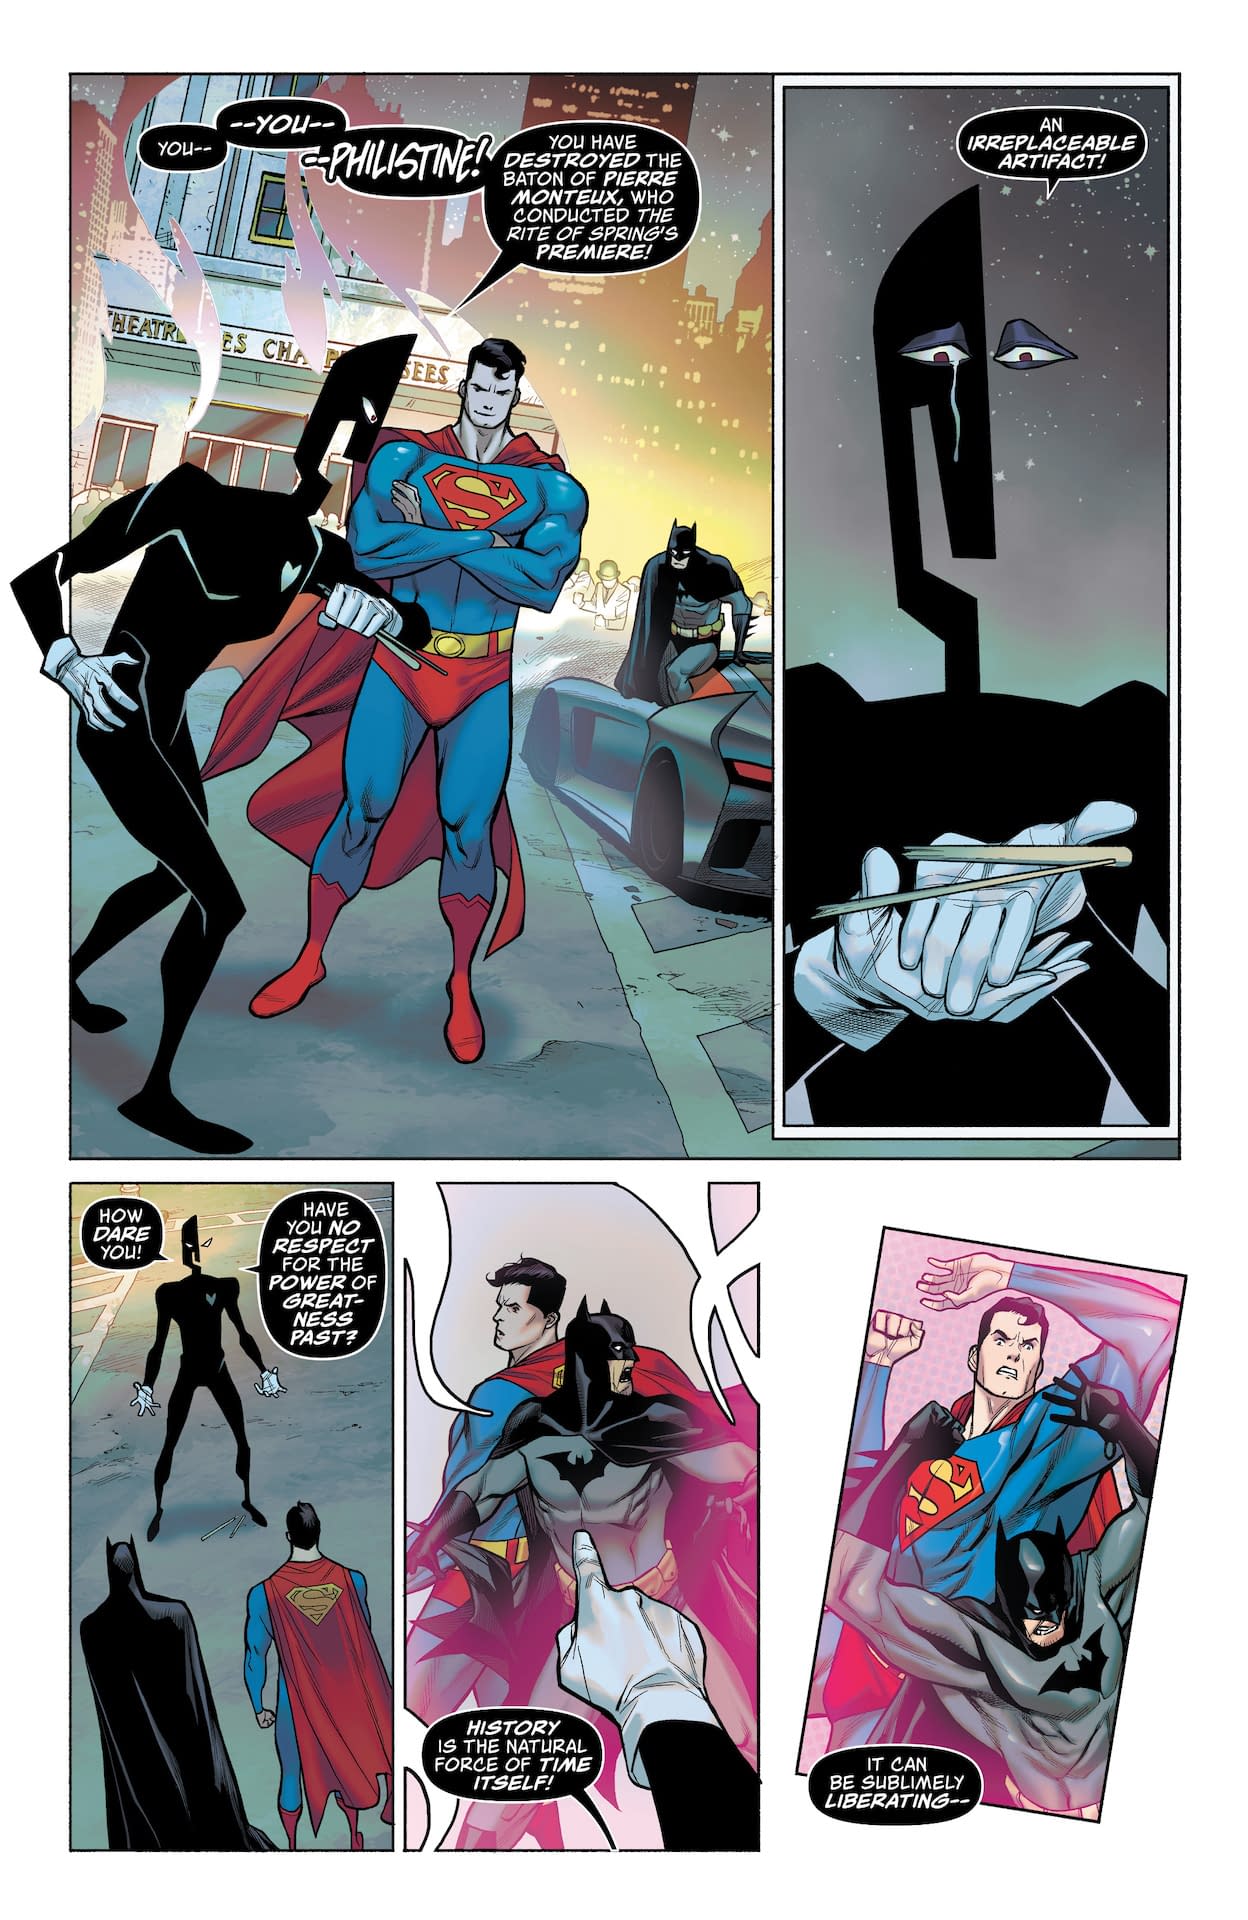 Superman: Kal-El Returns Special #1 Preview: The Title Says it All